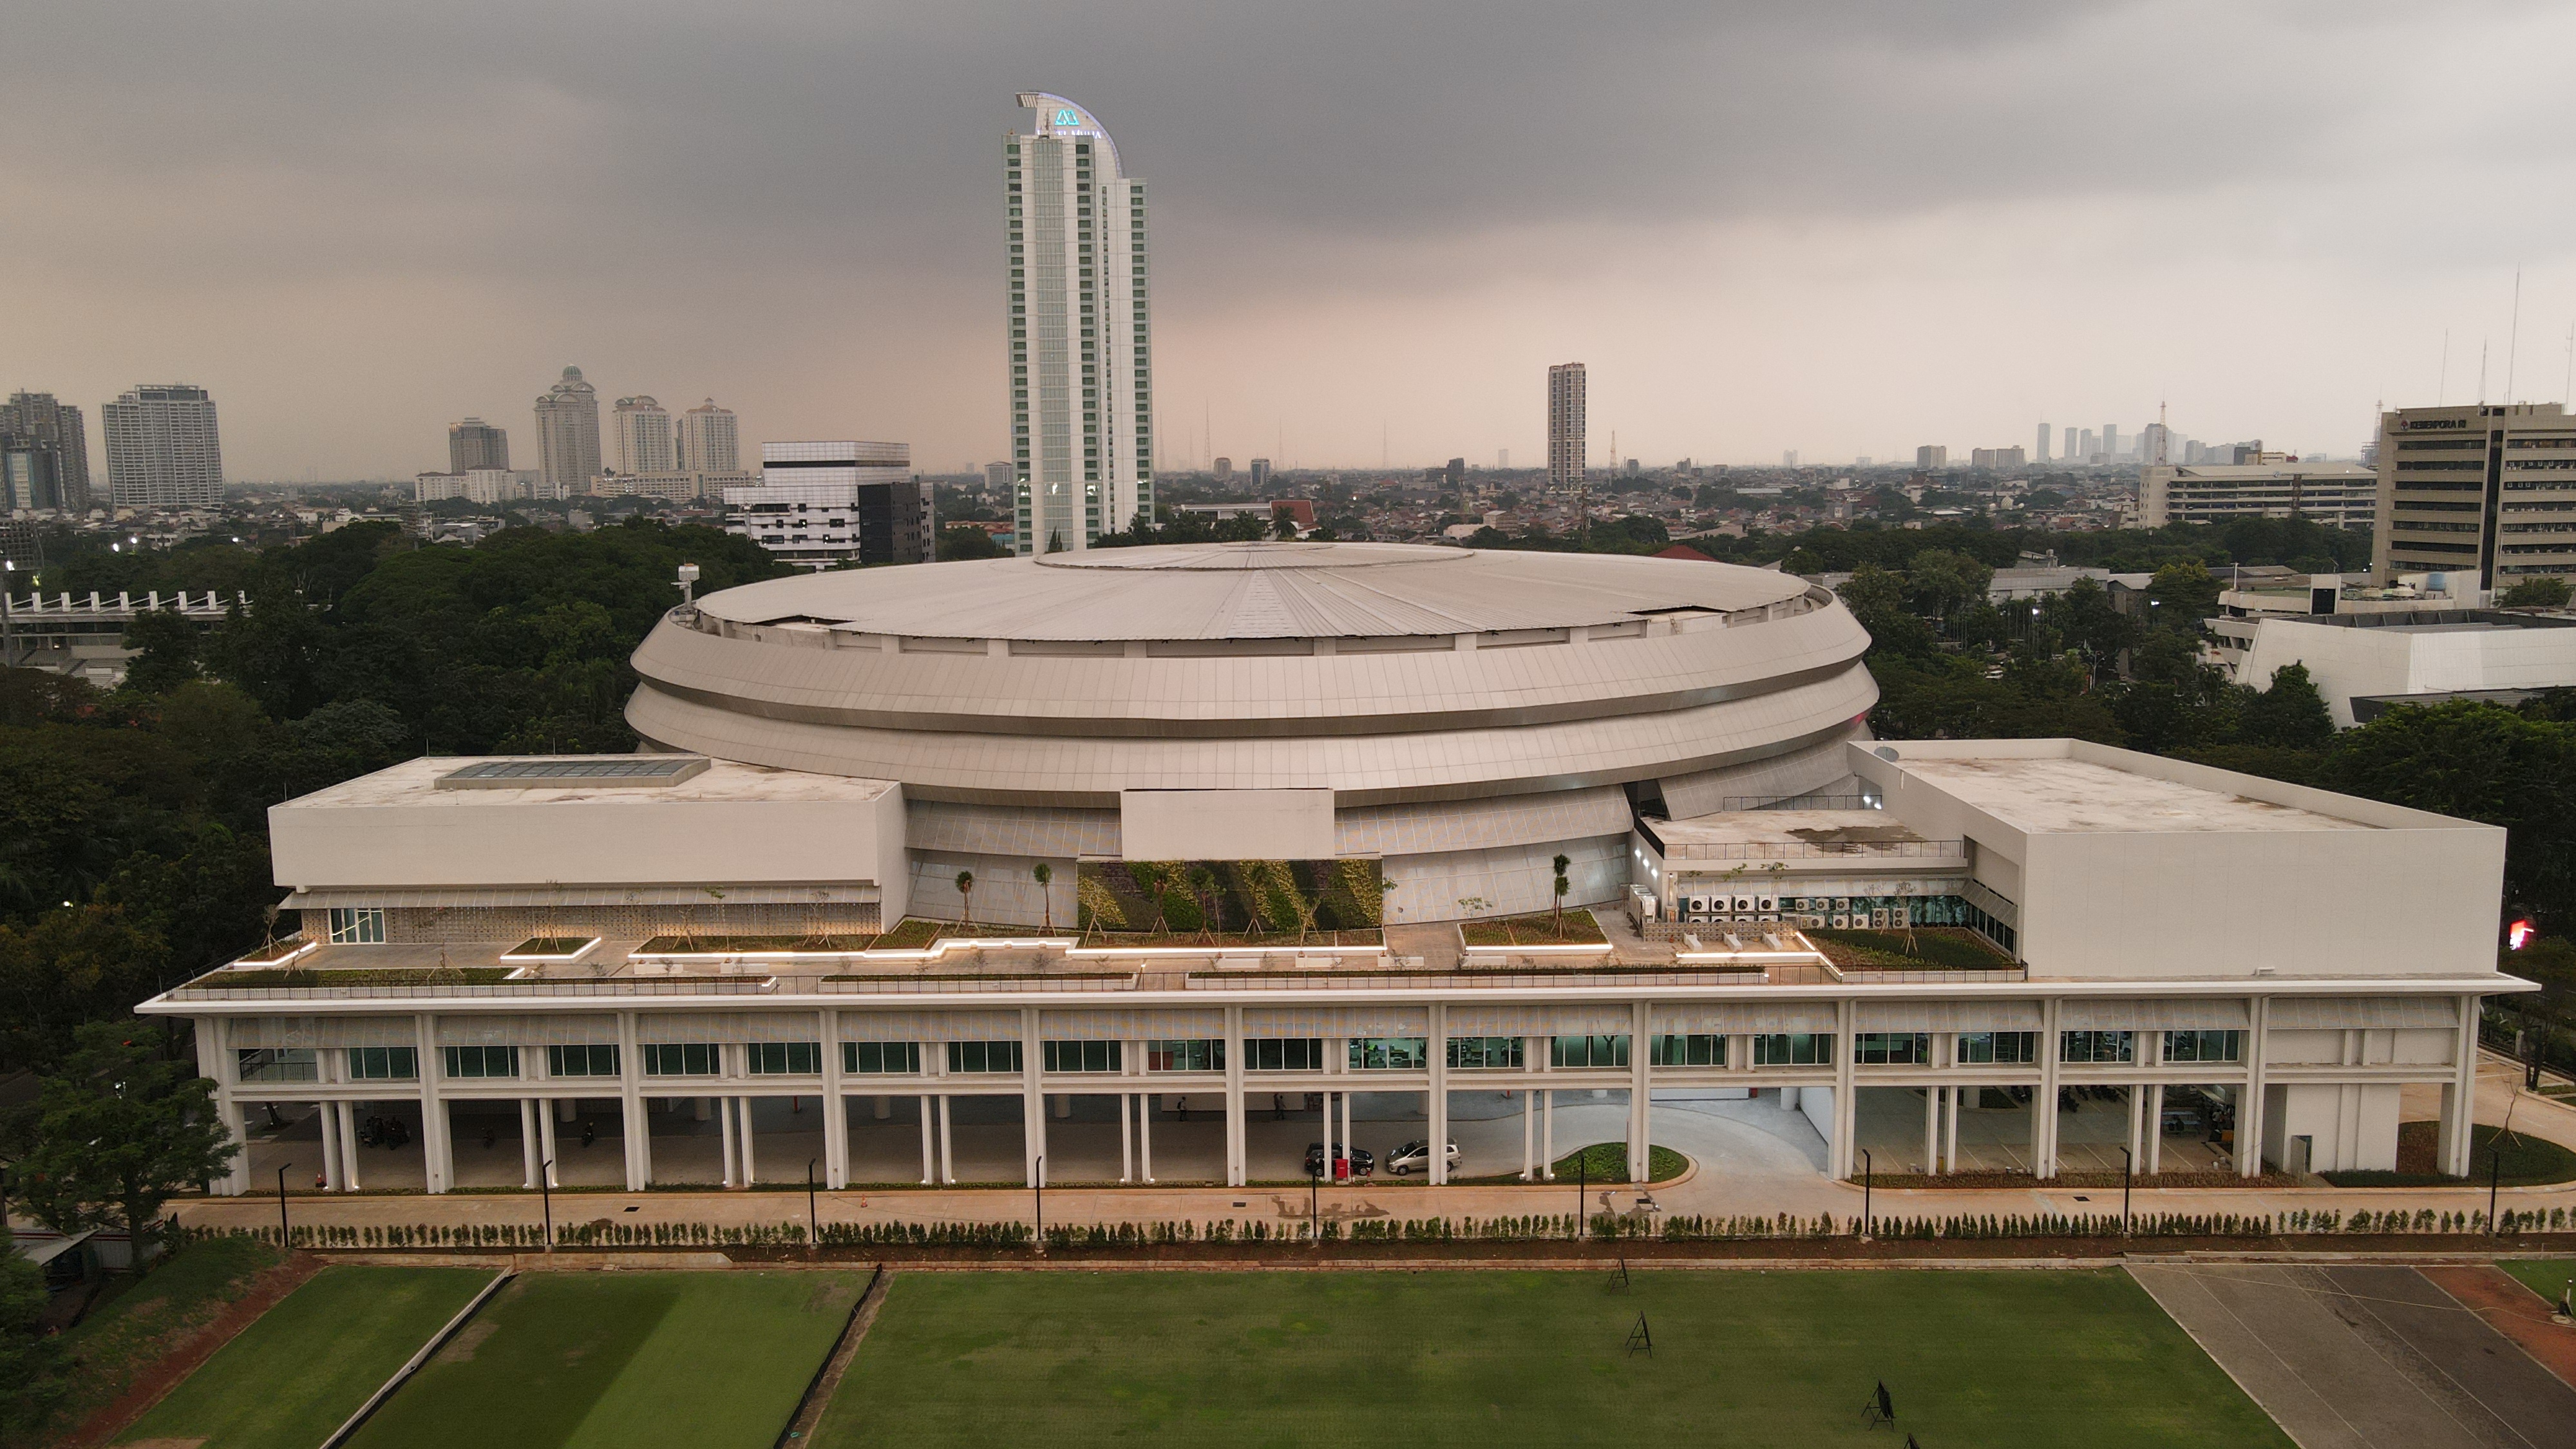 Indonesia Arena Stadion in Gelora Bung Karno complex